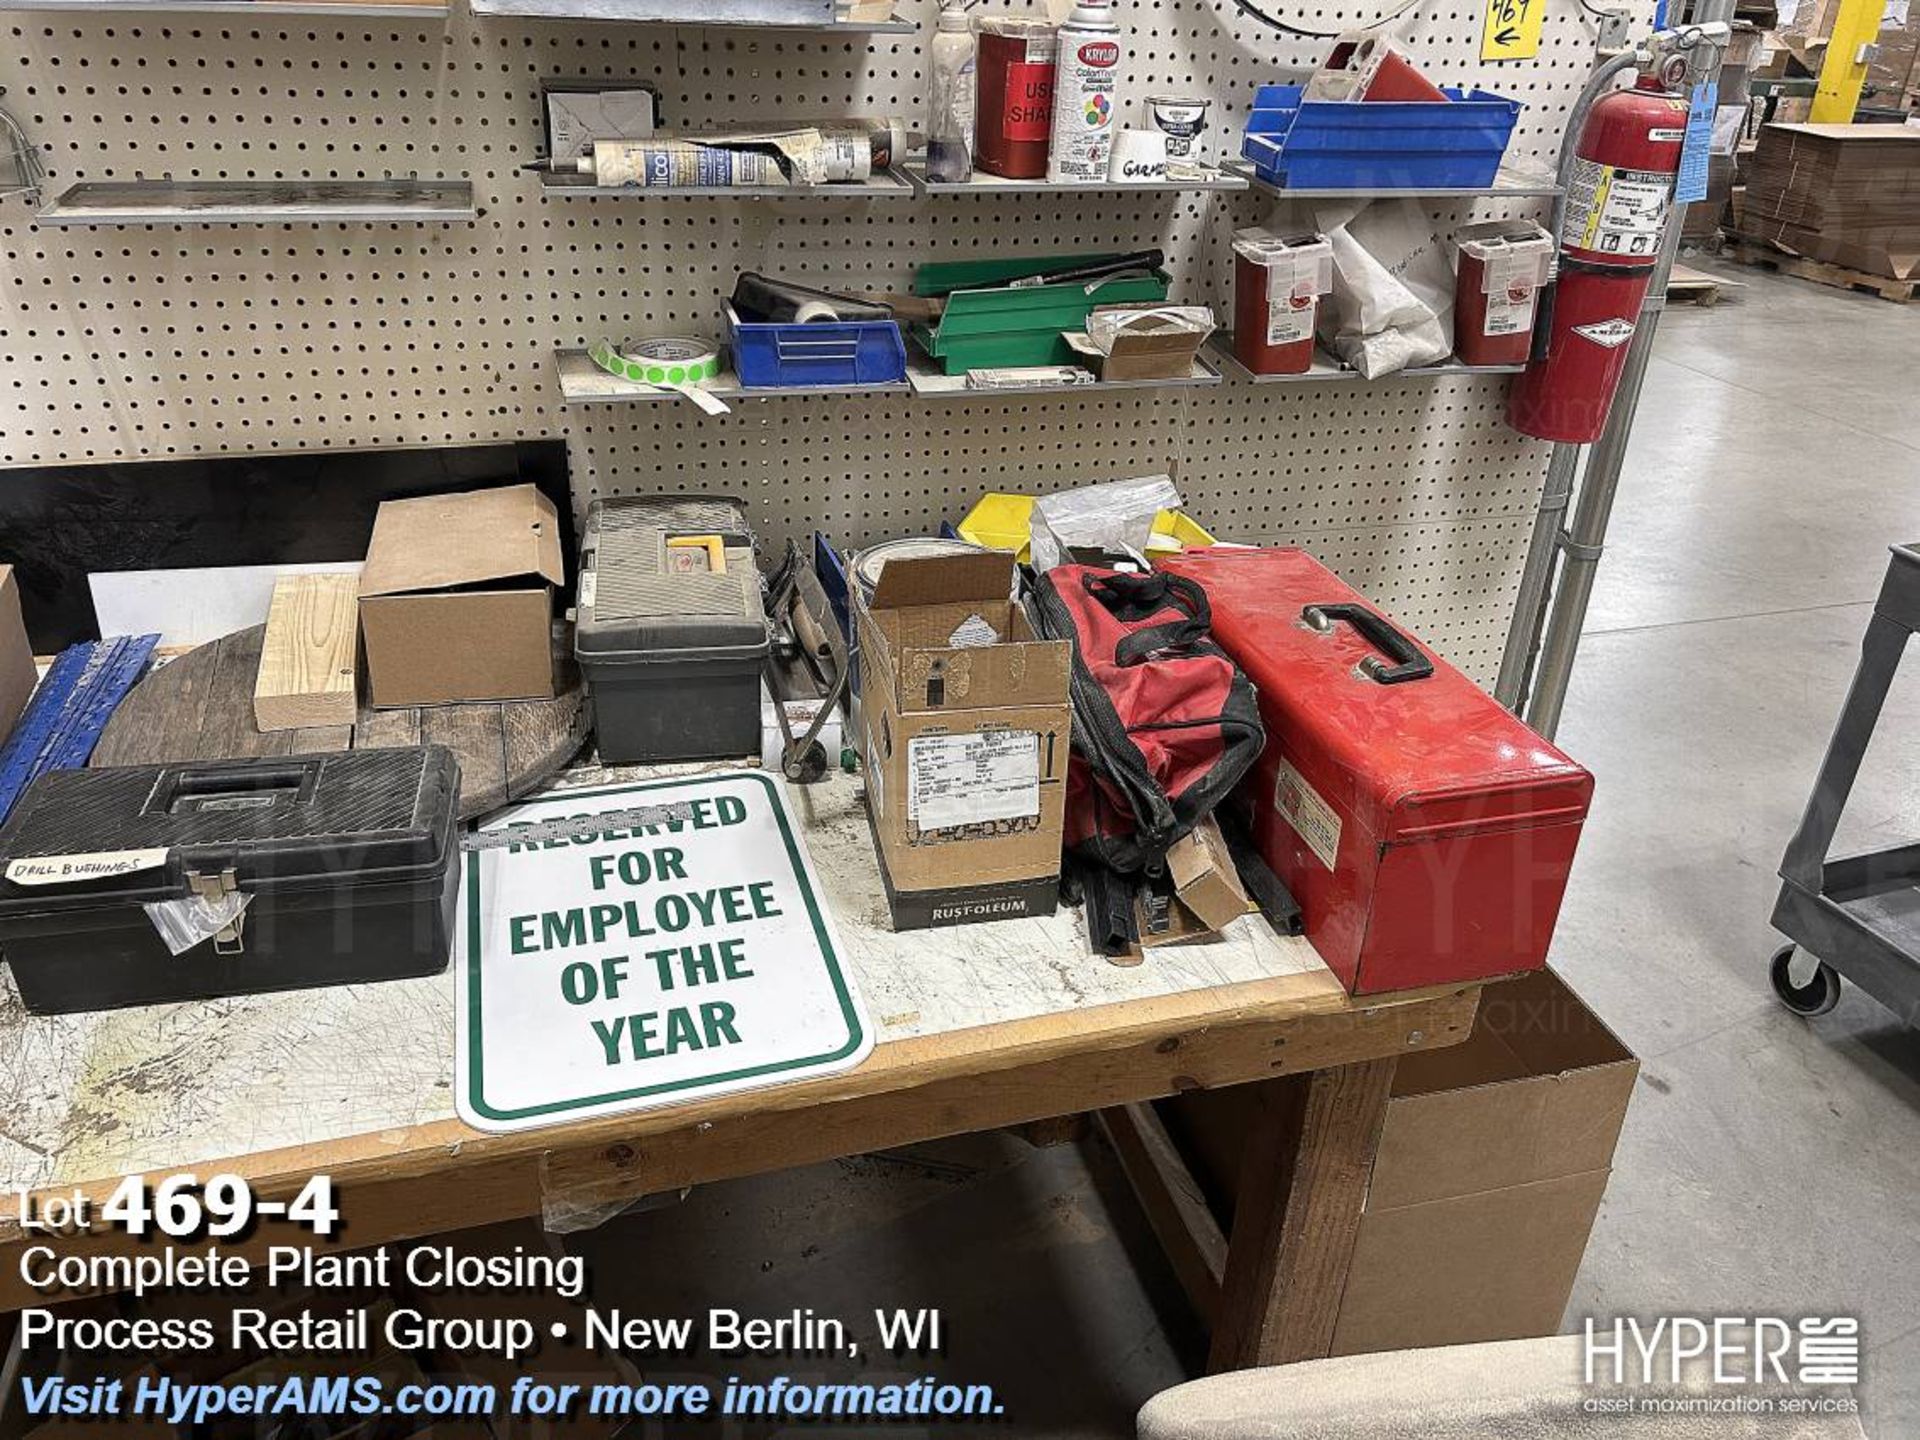 Table, signs, tool boxes, extension cords, shelf - Image 4 of 4